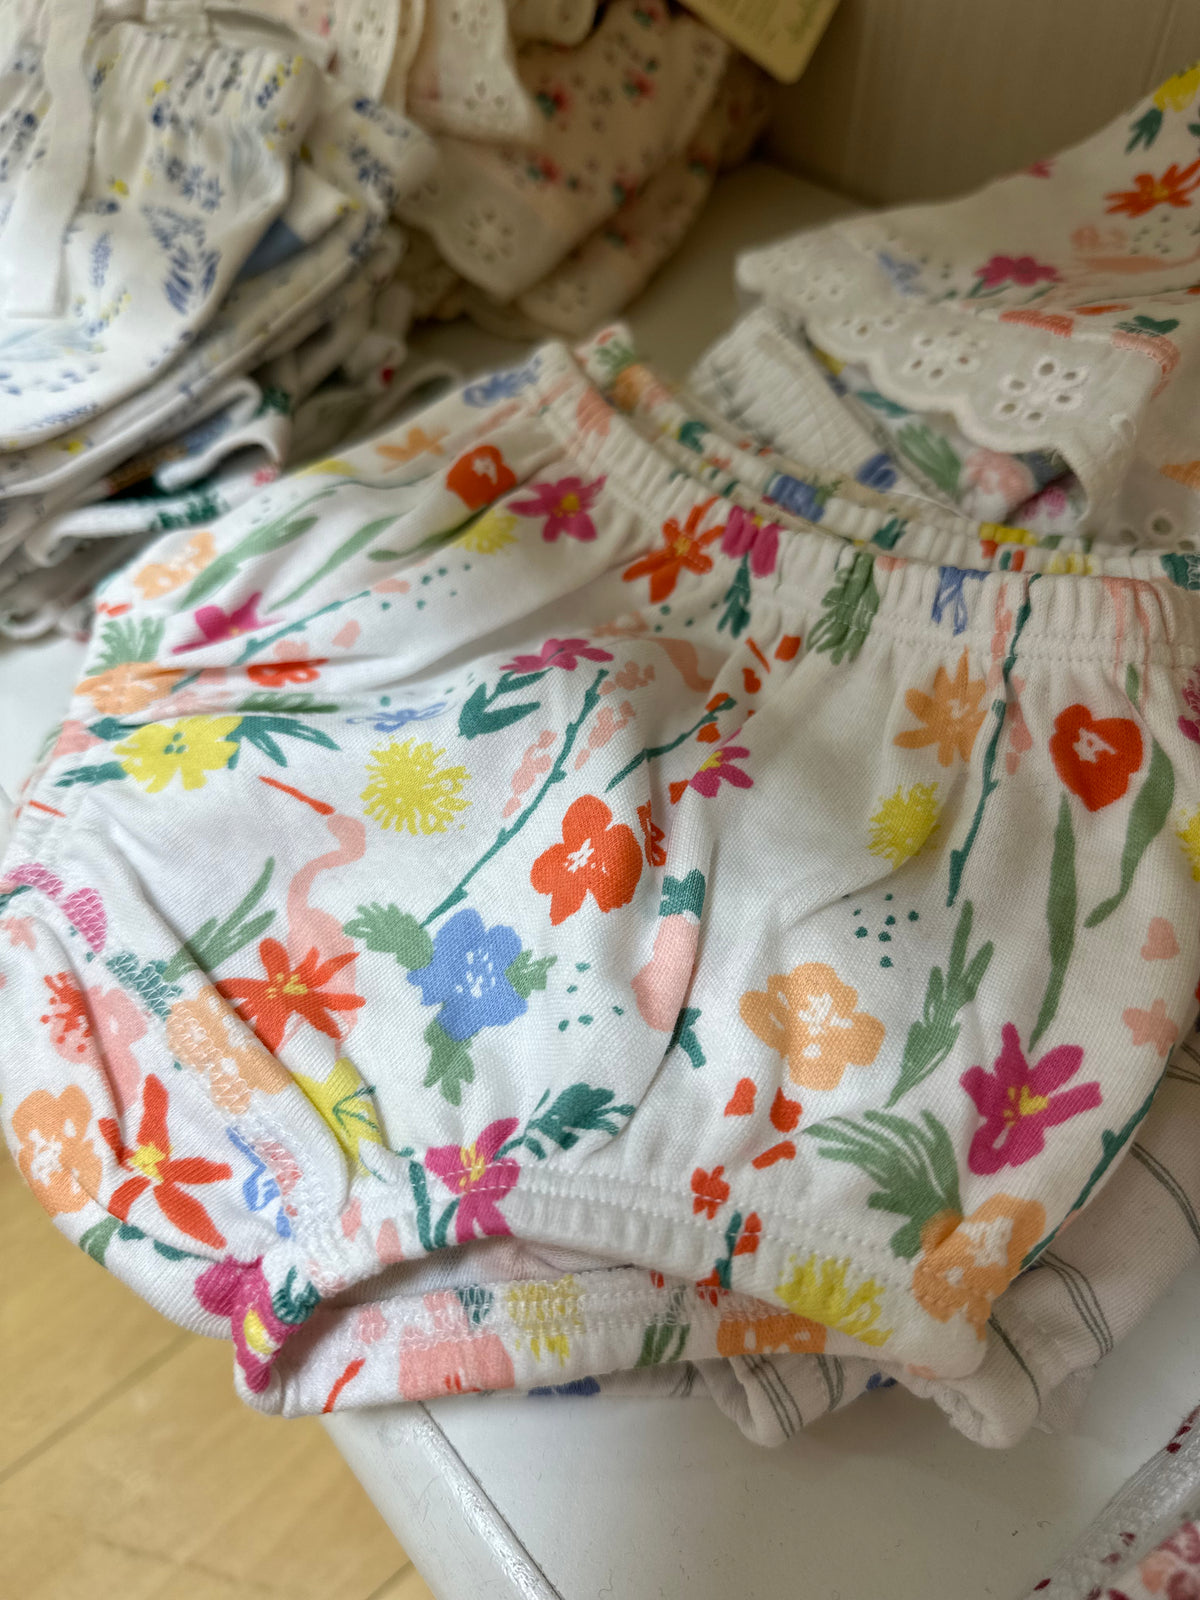 Floral Diaper Cover